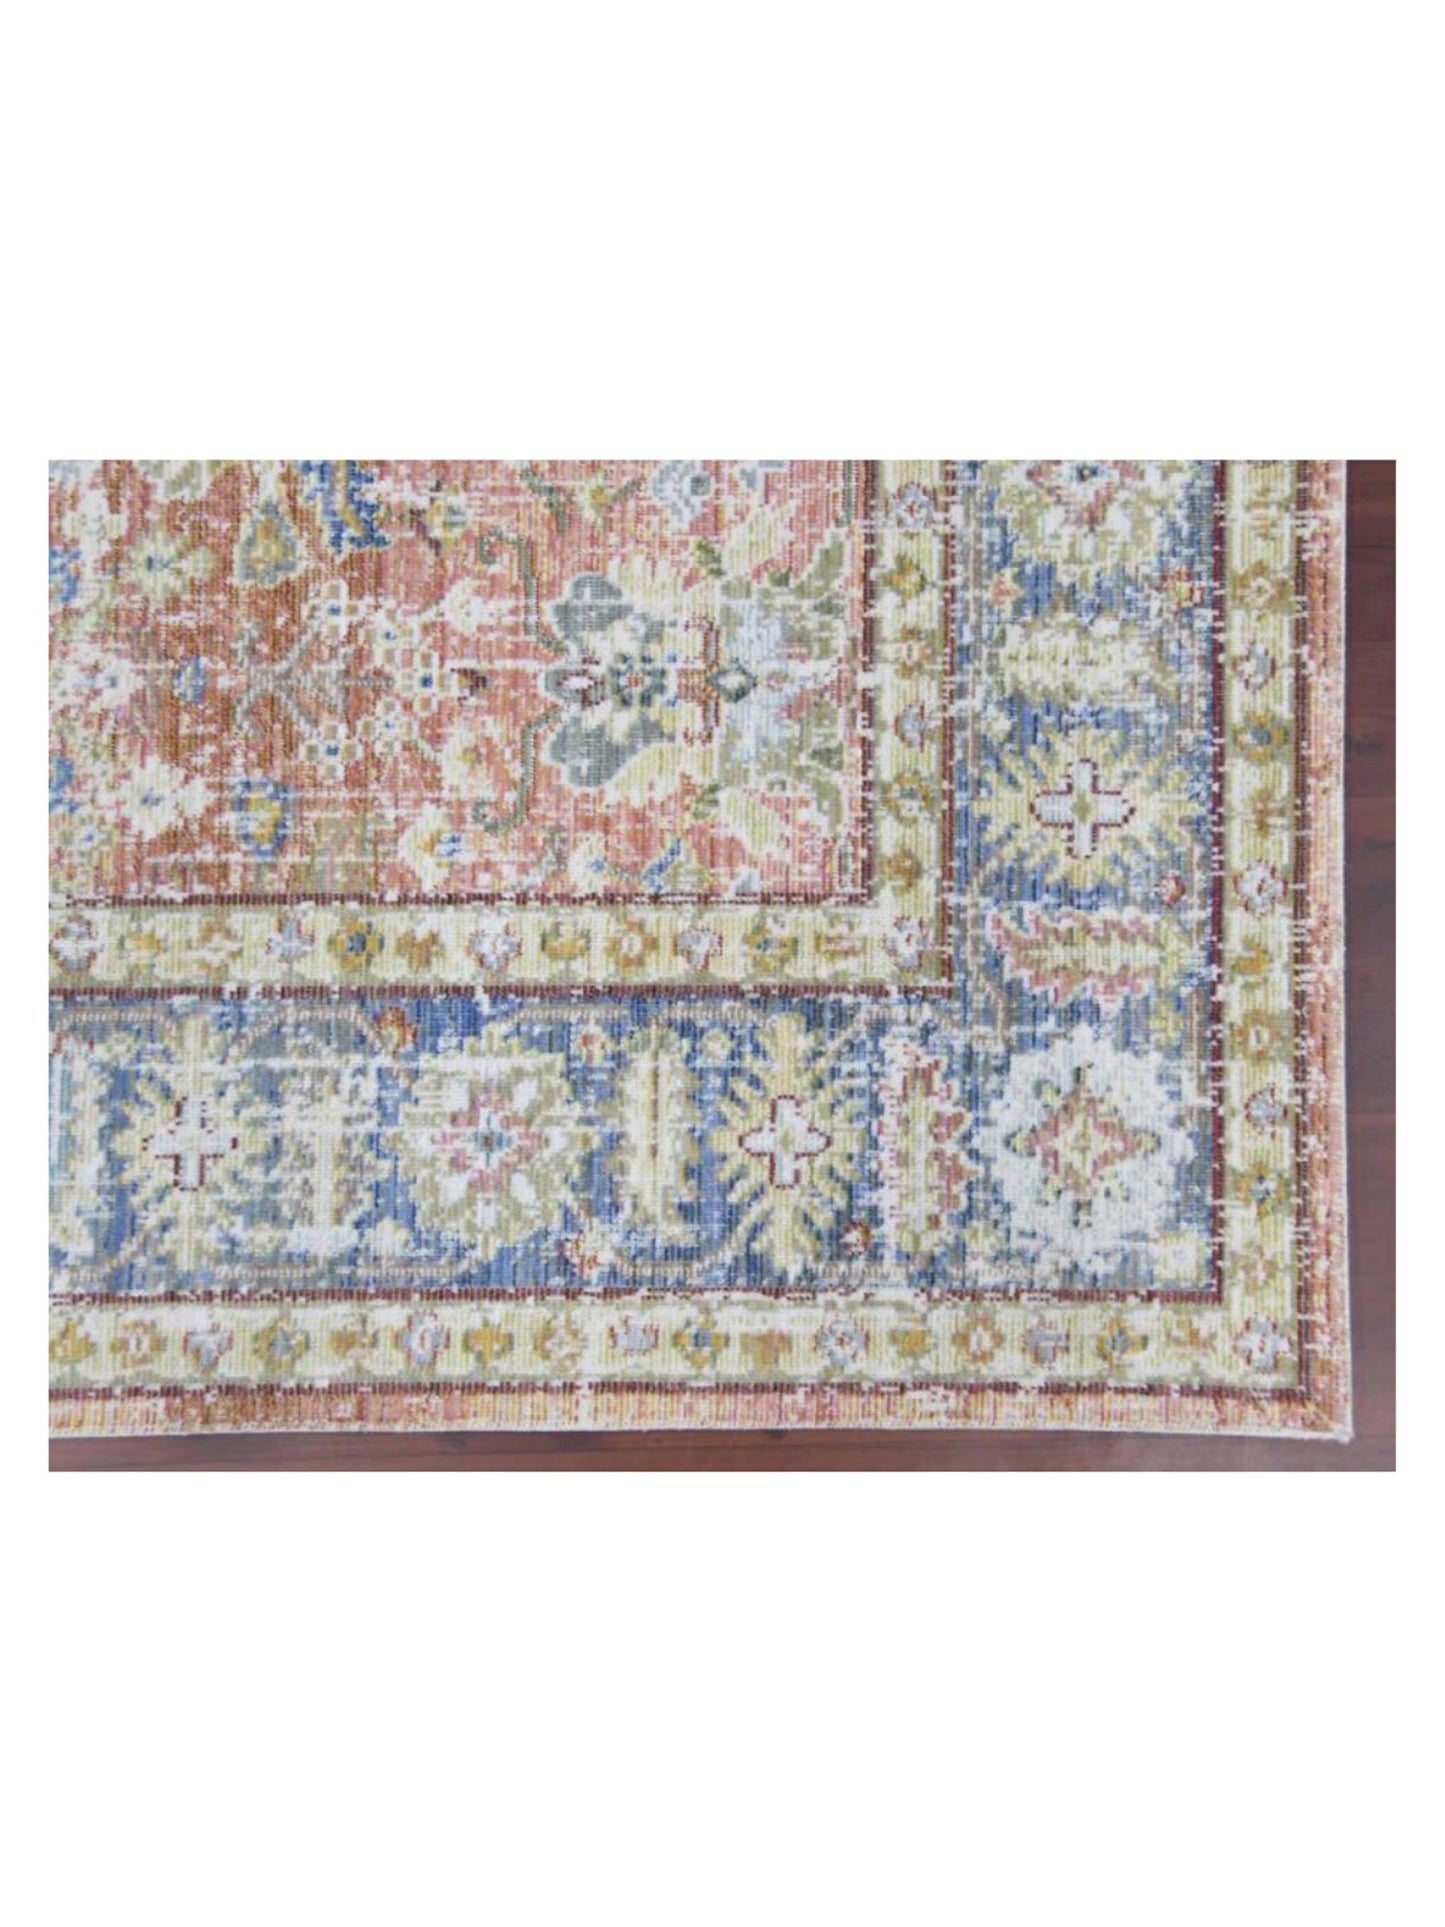 Limited Odeya OR-805 LIVING CORAL Traditional Machinemade Rug